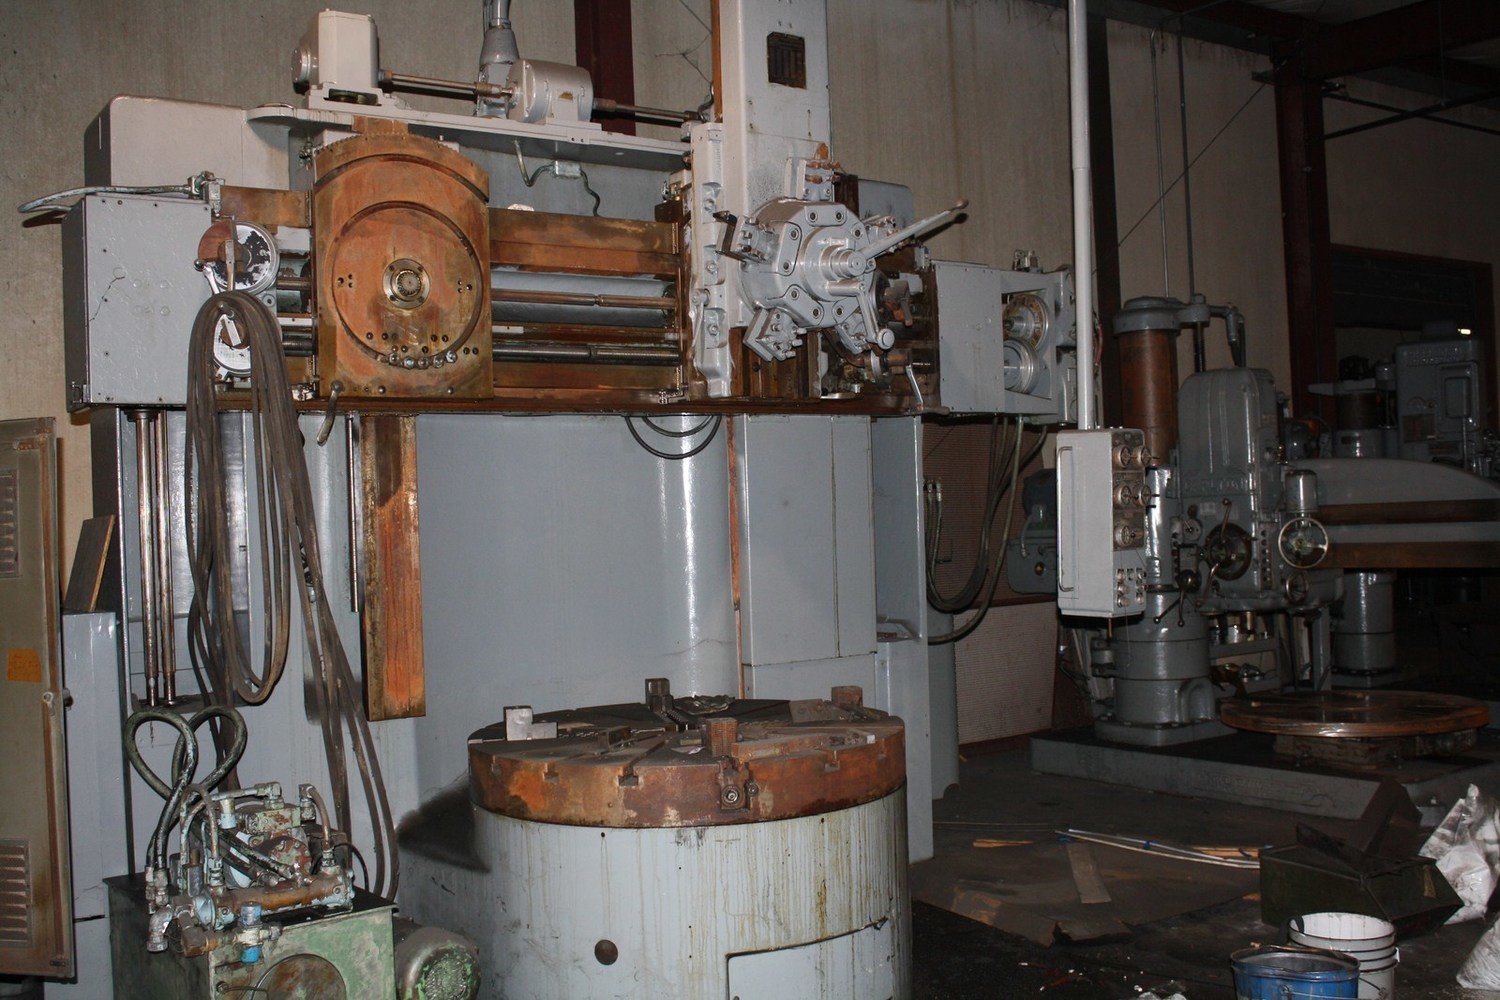 1 - USED 56” BULLARD “CUTMASTER” VERTICAL BORING MILL WITH TRACER